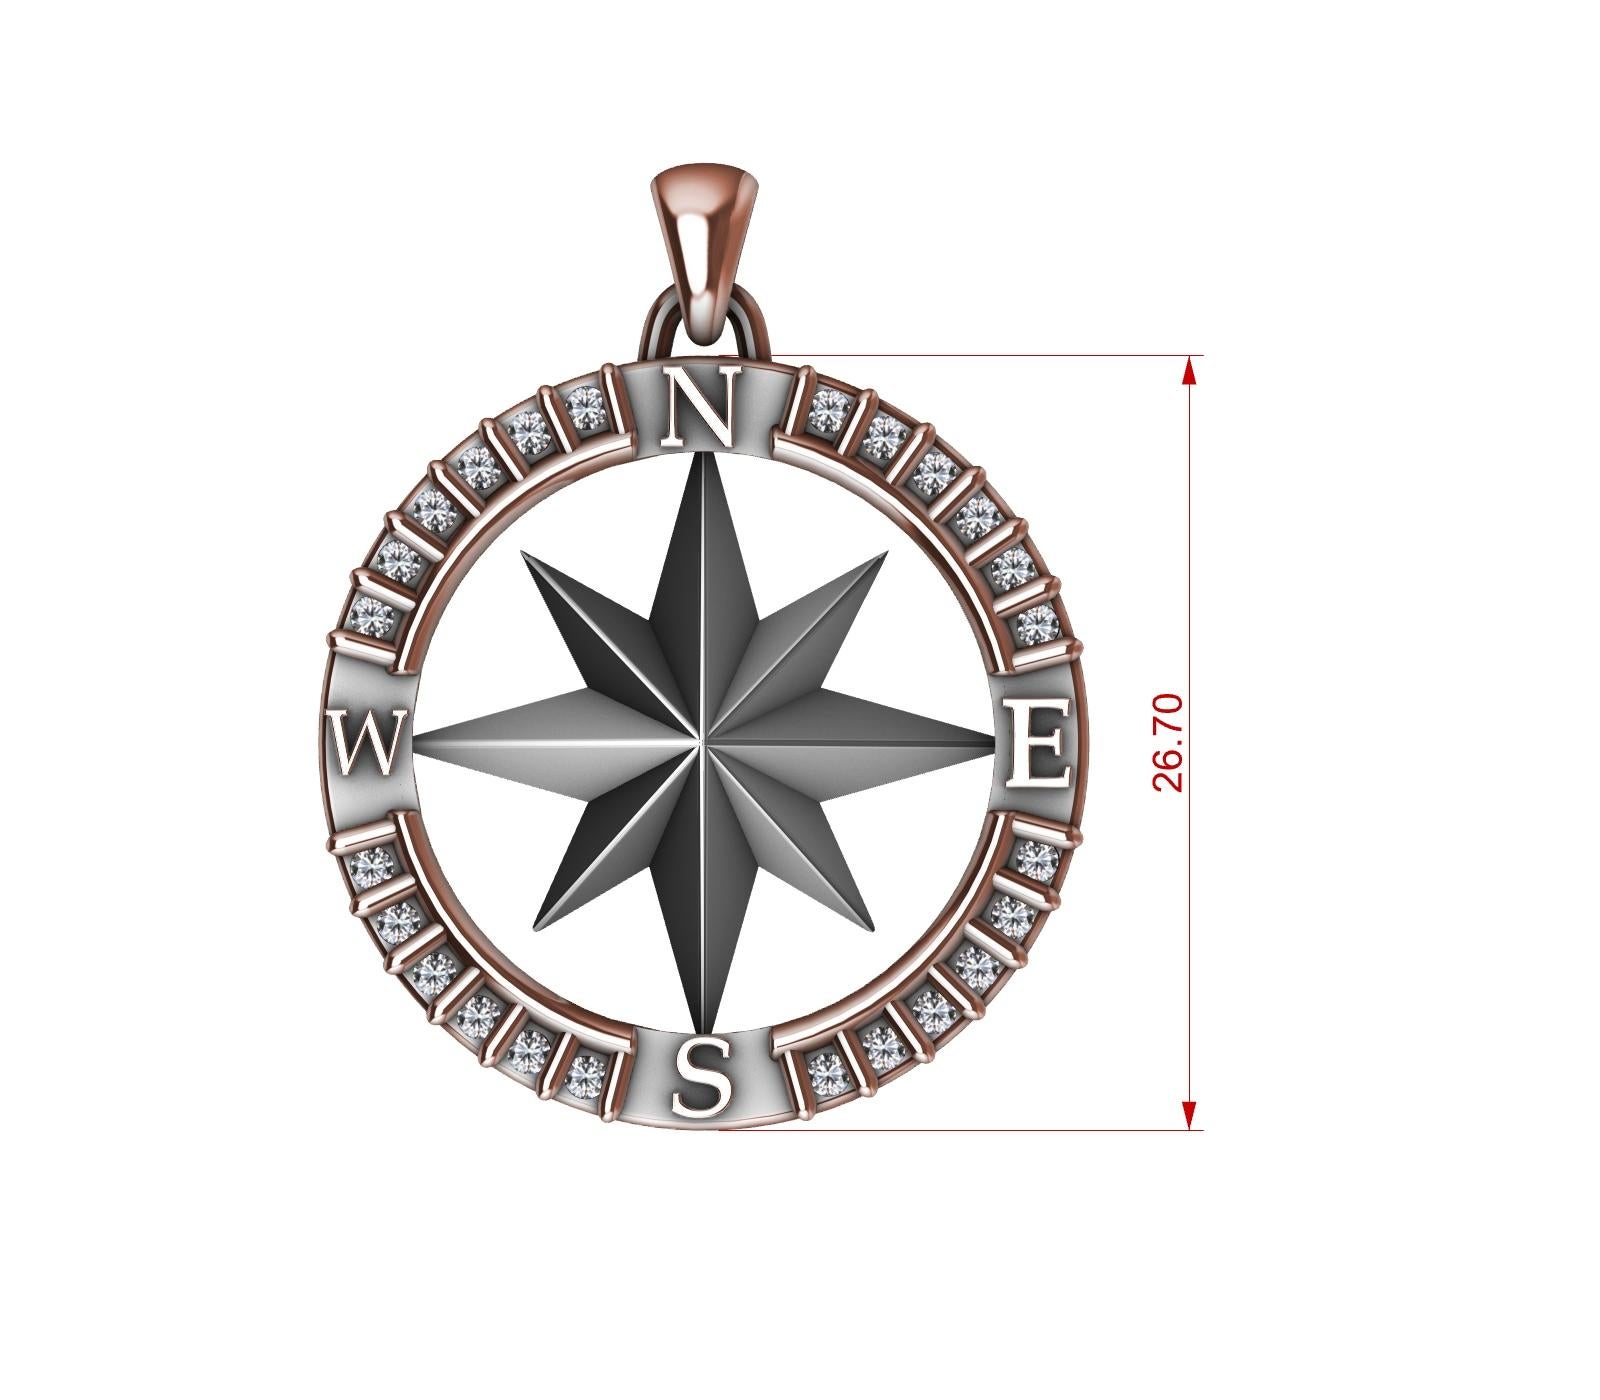 Platinum and 18 Karat Yellow Gold Diamond Sailors Compass Pendant, For you water and wind lovers. Tiffany Designer , Thomas Kurilla has not forgotten you mates. Inspired from antique sailor's compasses. A sailing lover as well. Wear this and you'll